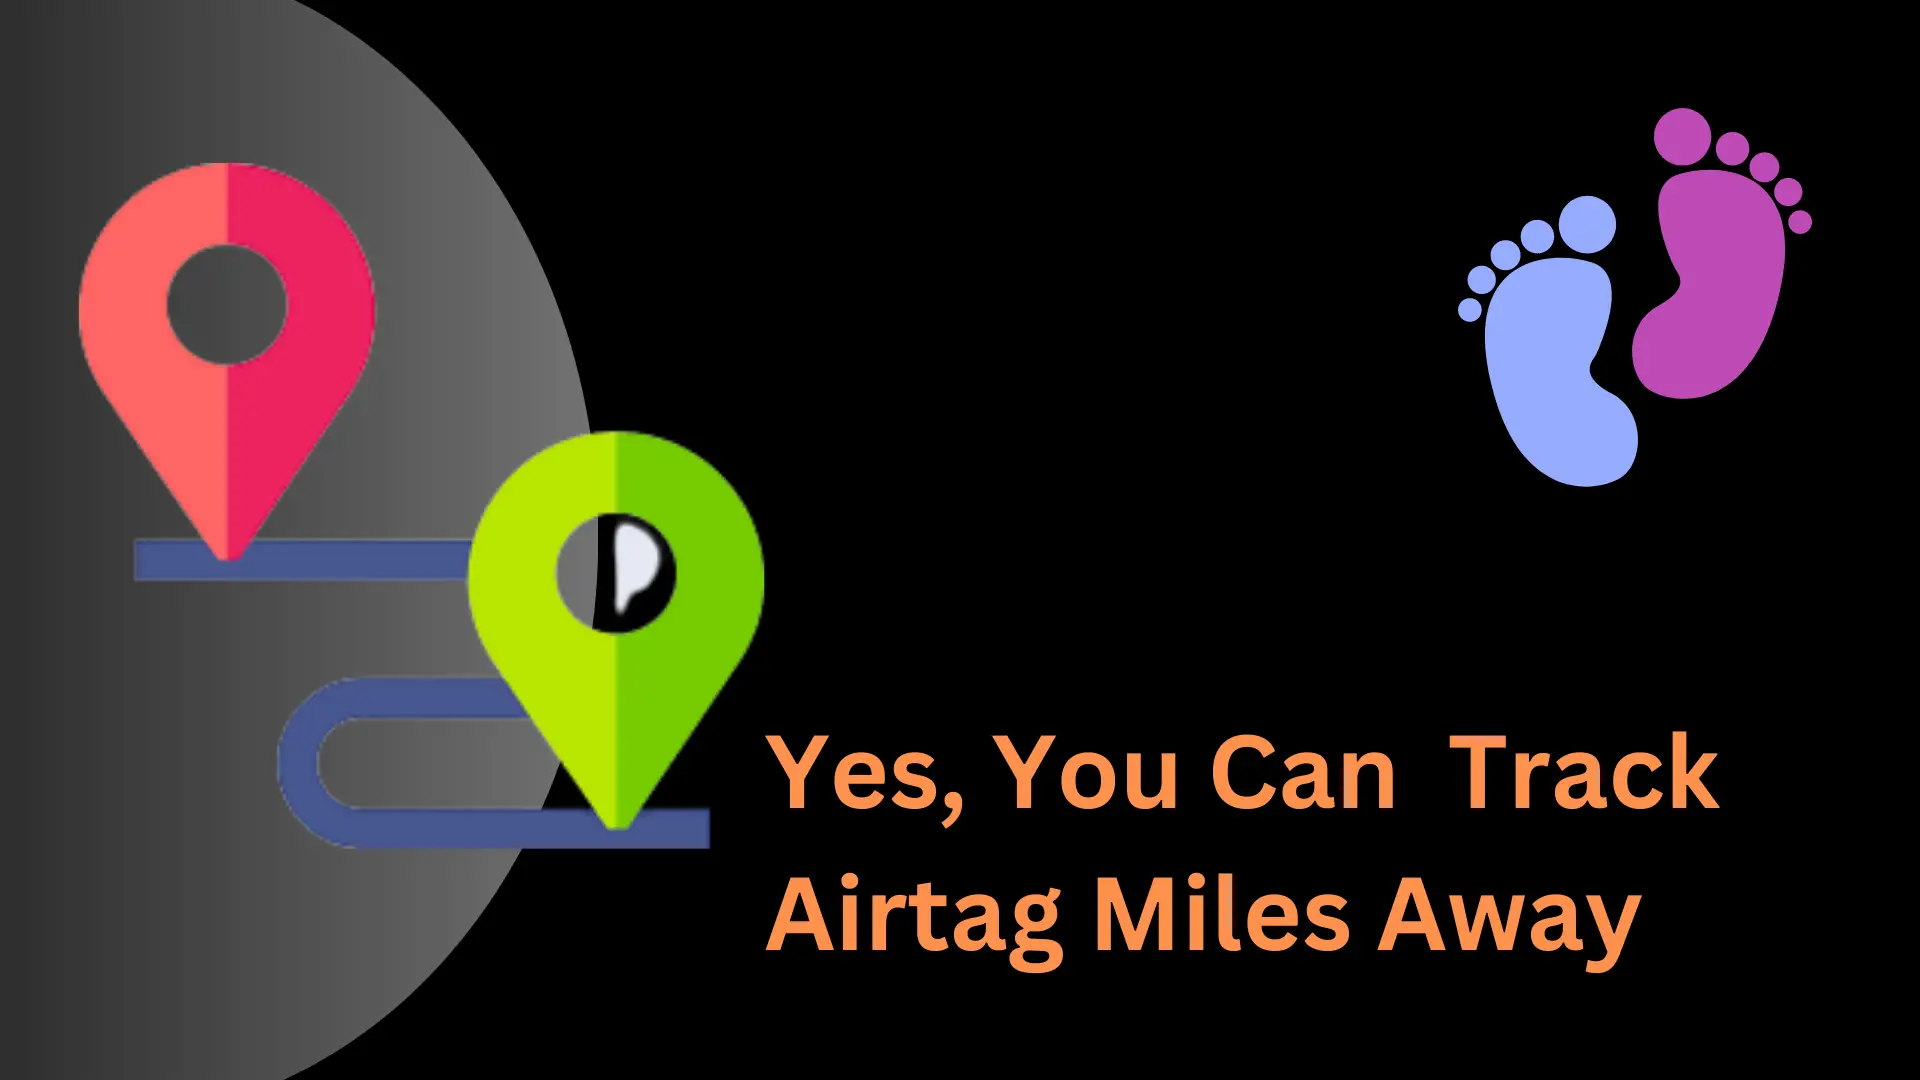 [FAQ] Can You Track Airtag Miles Away? Oh Yes!